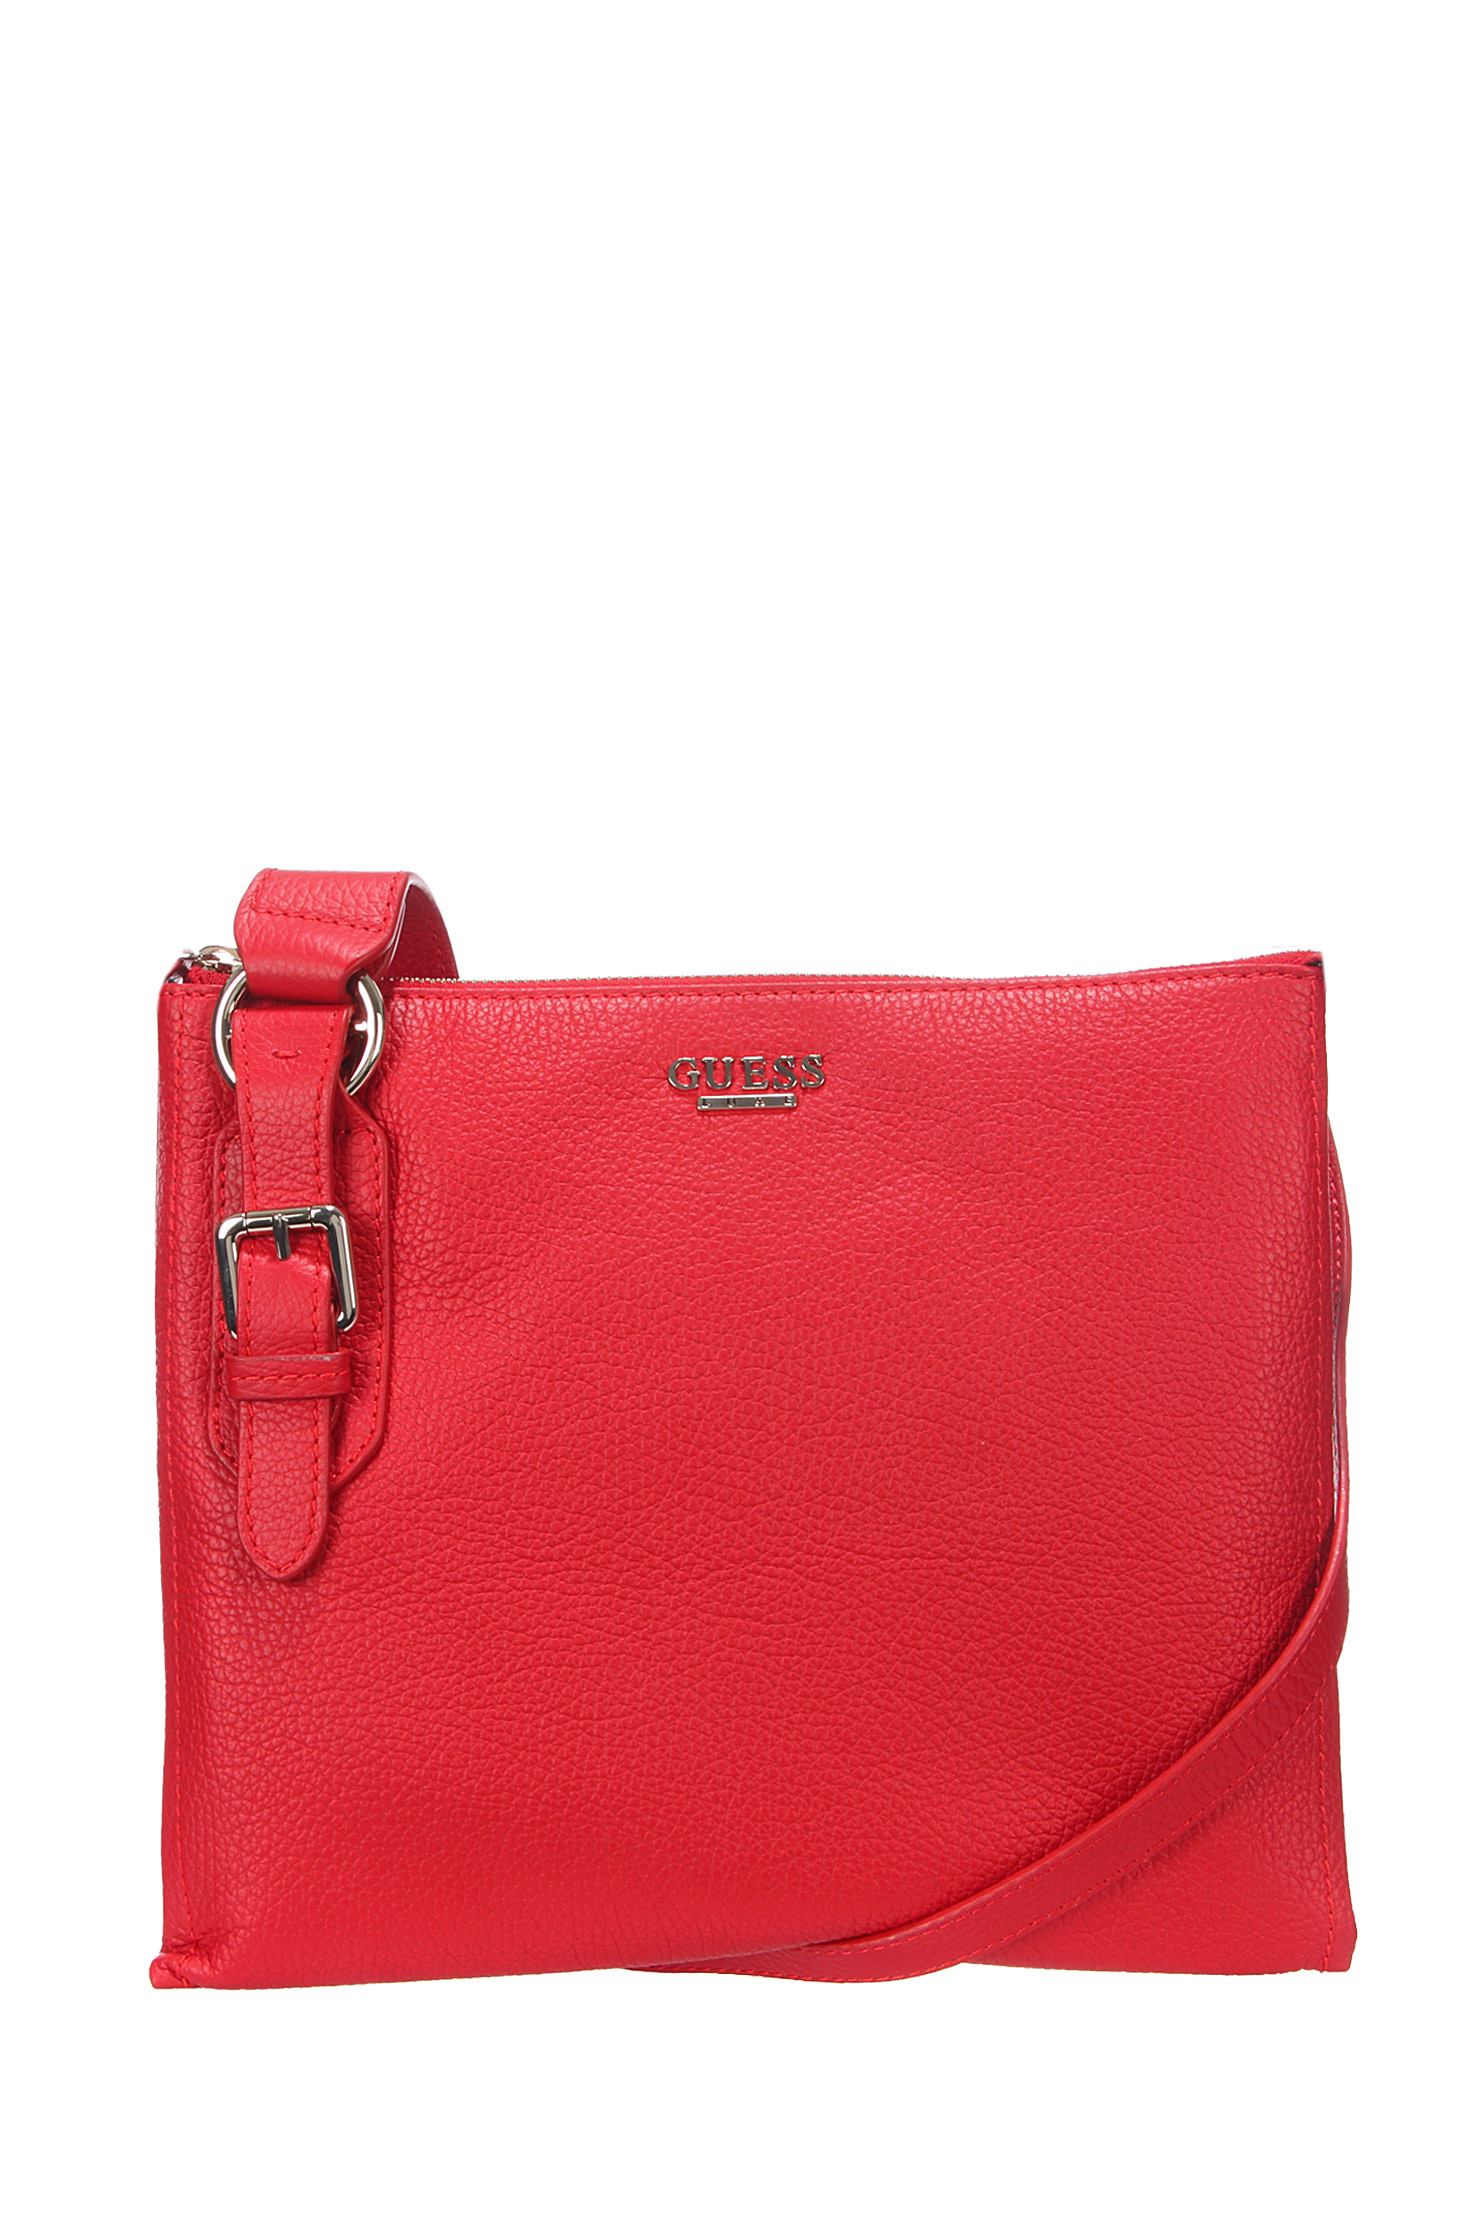 Guess Leather Bag in Red | Lyst